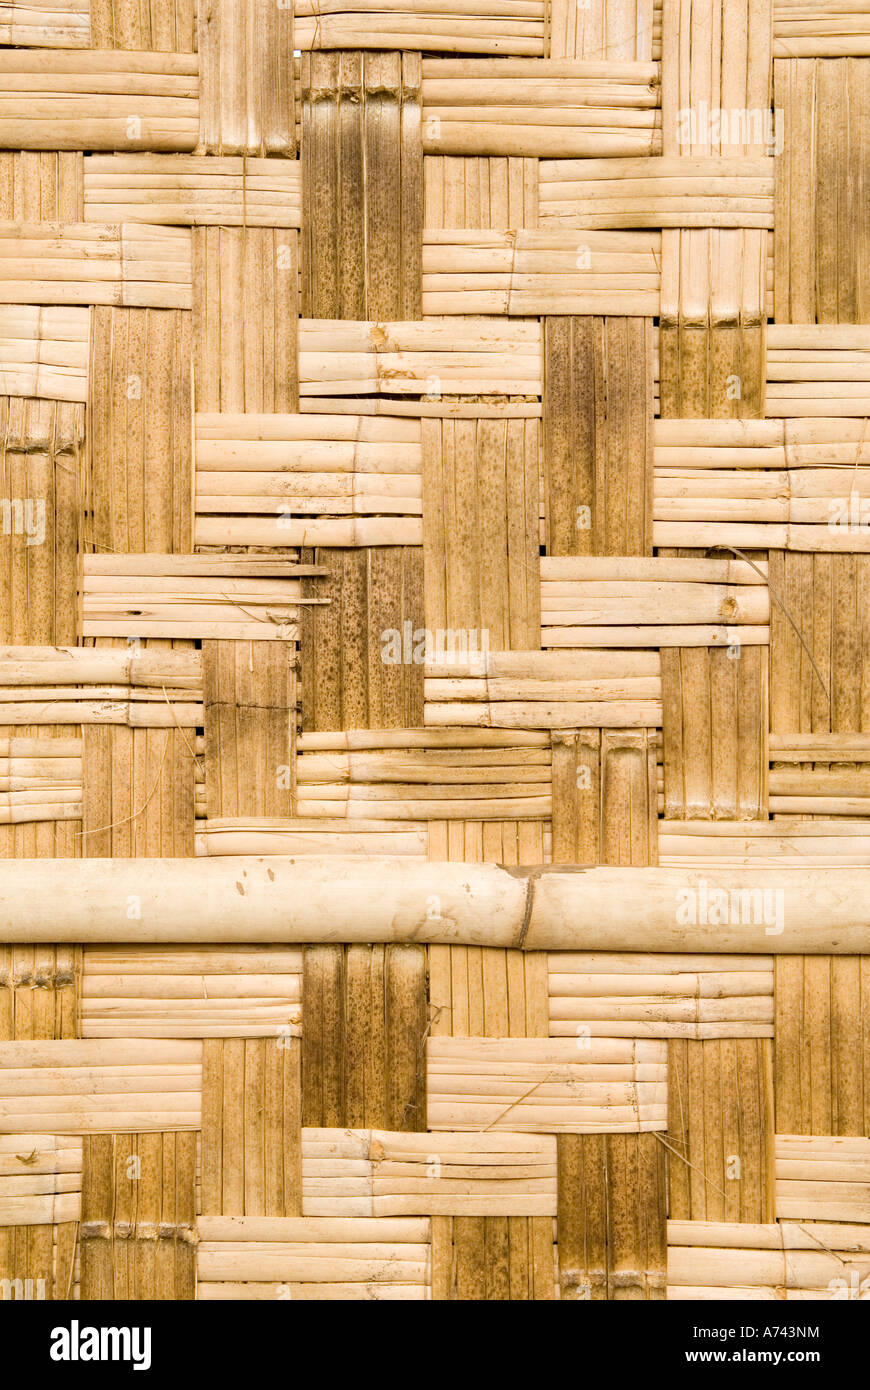 https://c8.alamy.com/comp/A743NM/woven-bamboo-mat-as-exterior-wall-of-a-house-katchin-state-myanmar-A743NM.jpg